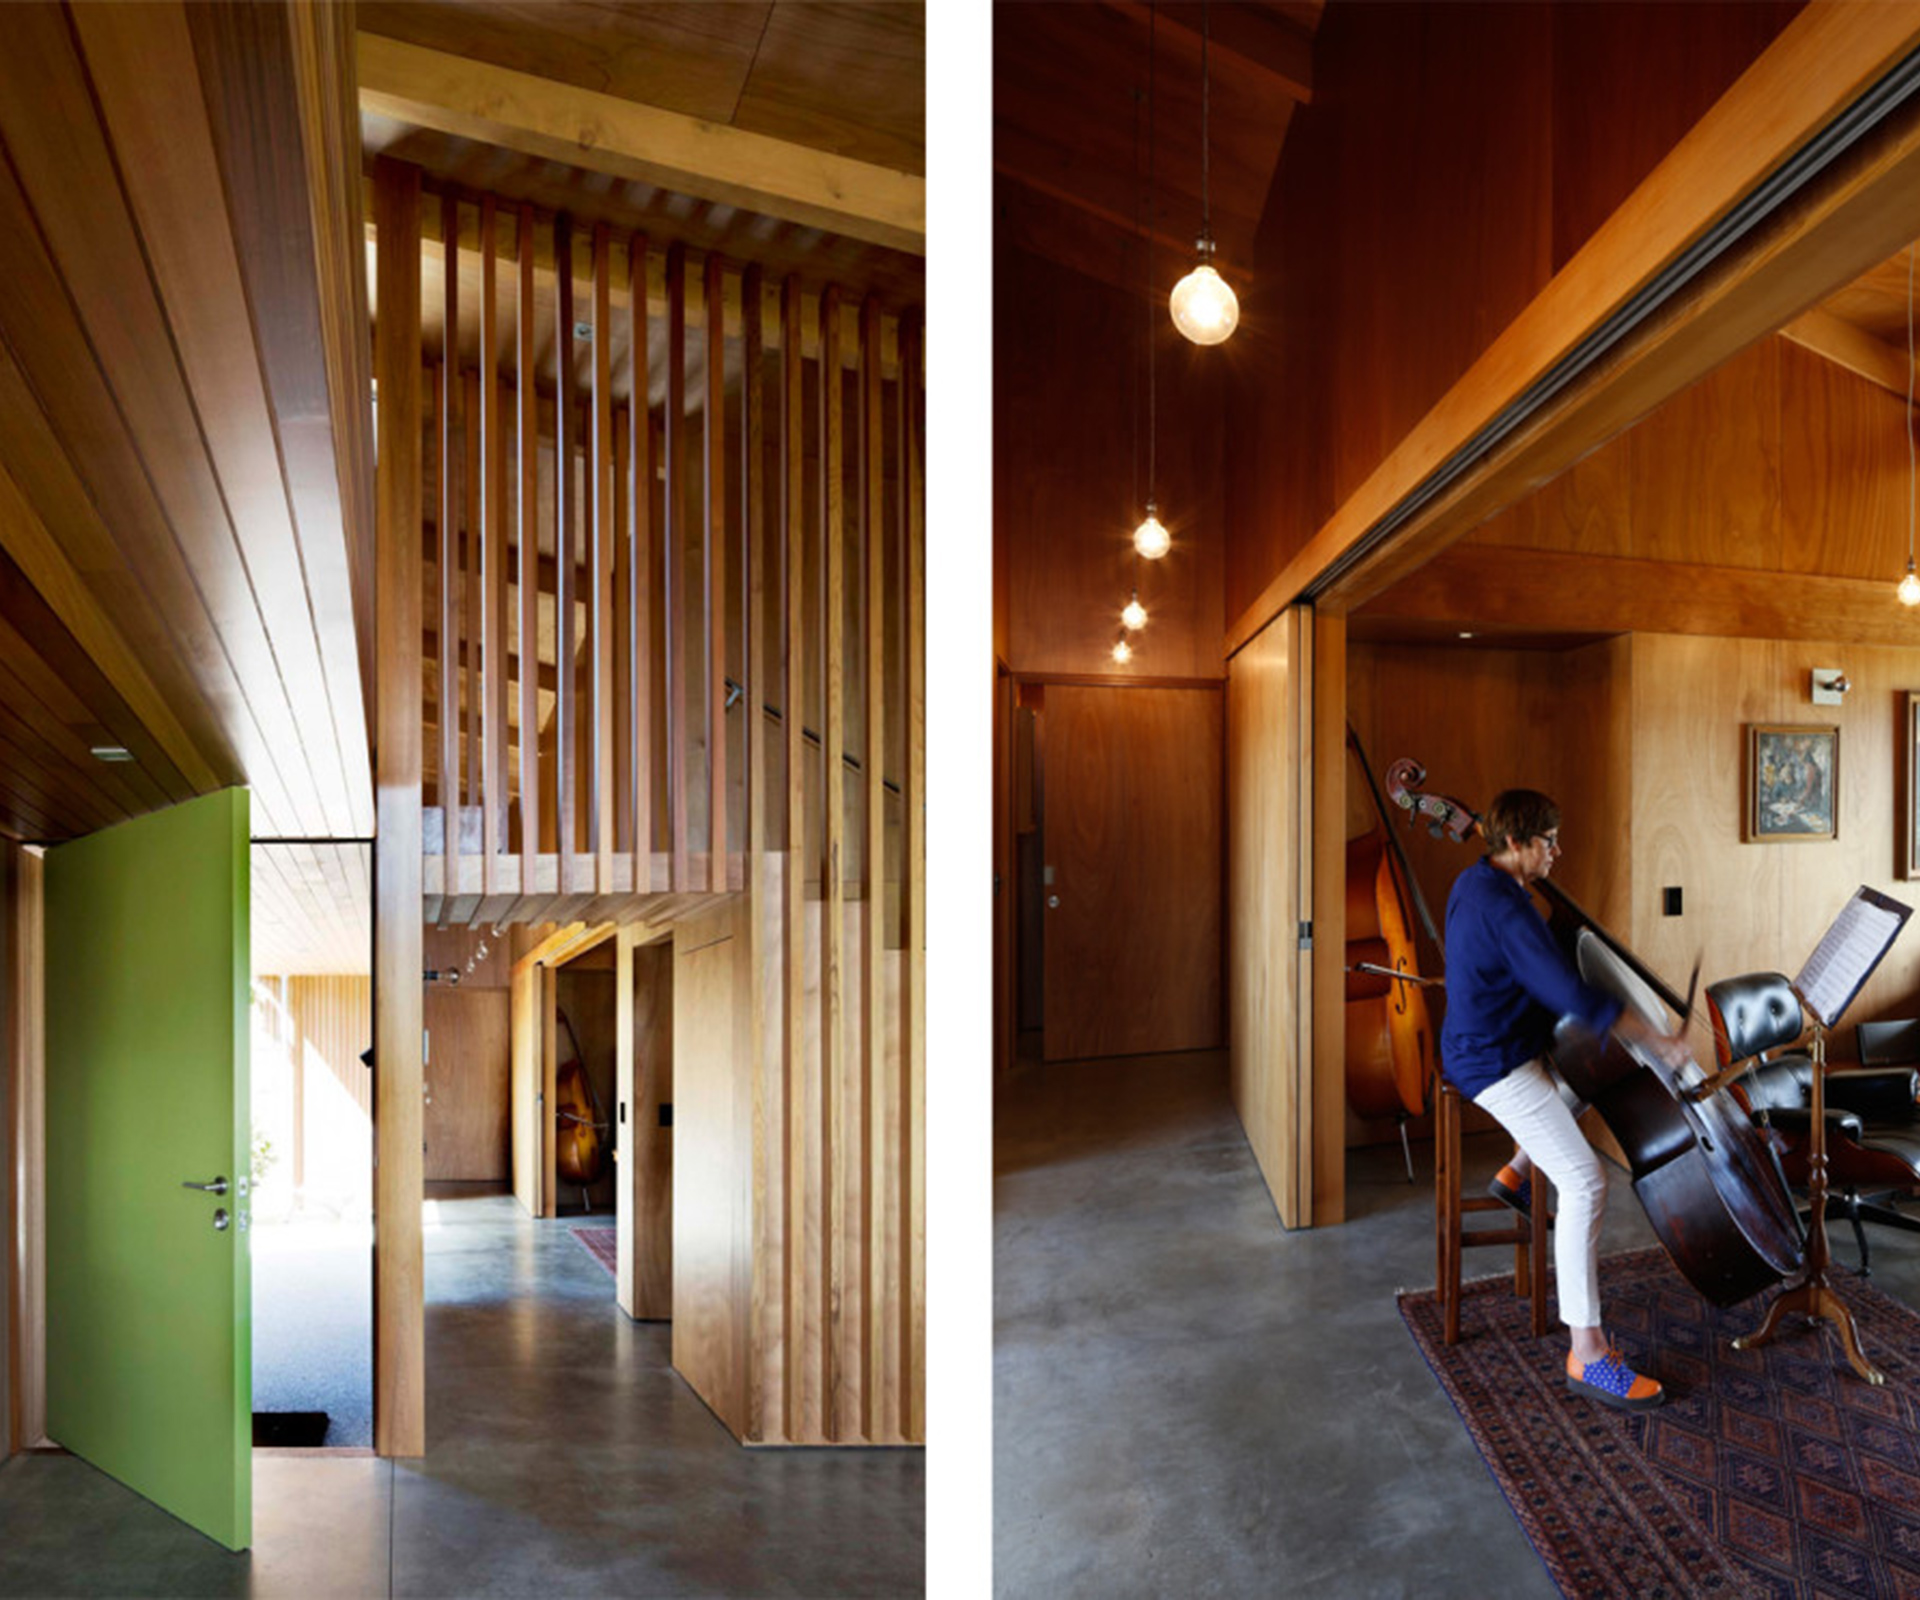 The home's entry (left) opens into a double-height living space. The hall (right) leads to the main bedroom past a living area where Kate Lovell practices her double bass.